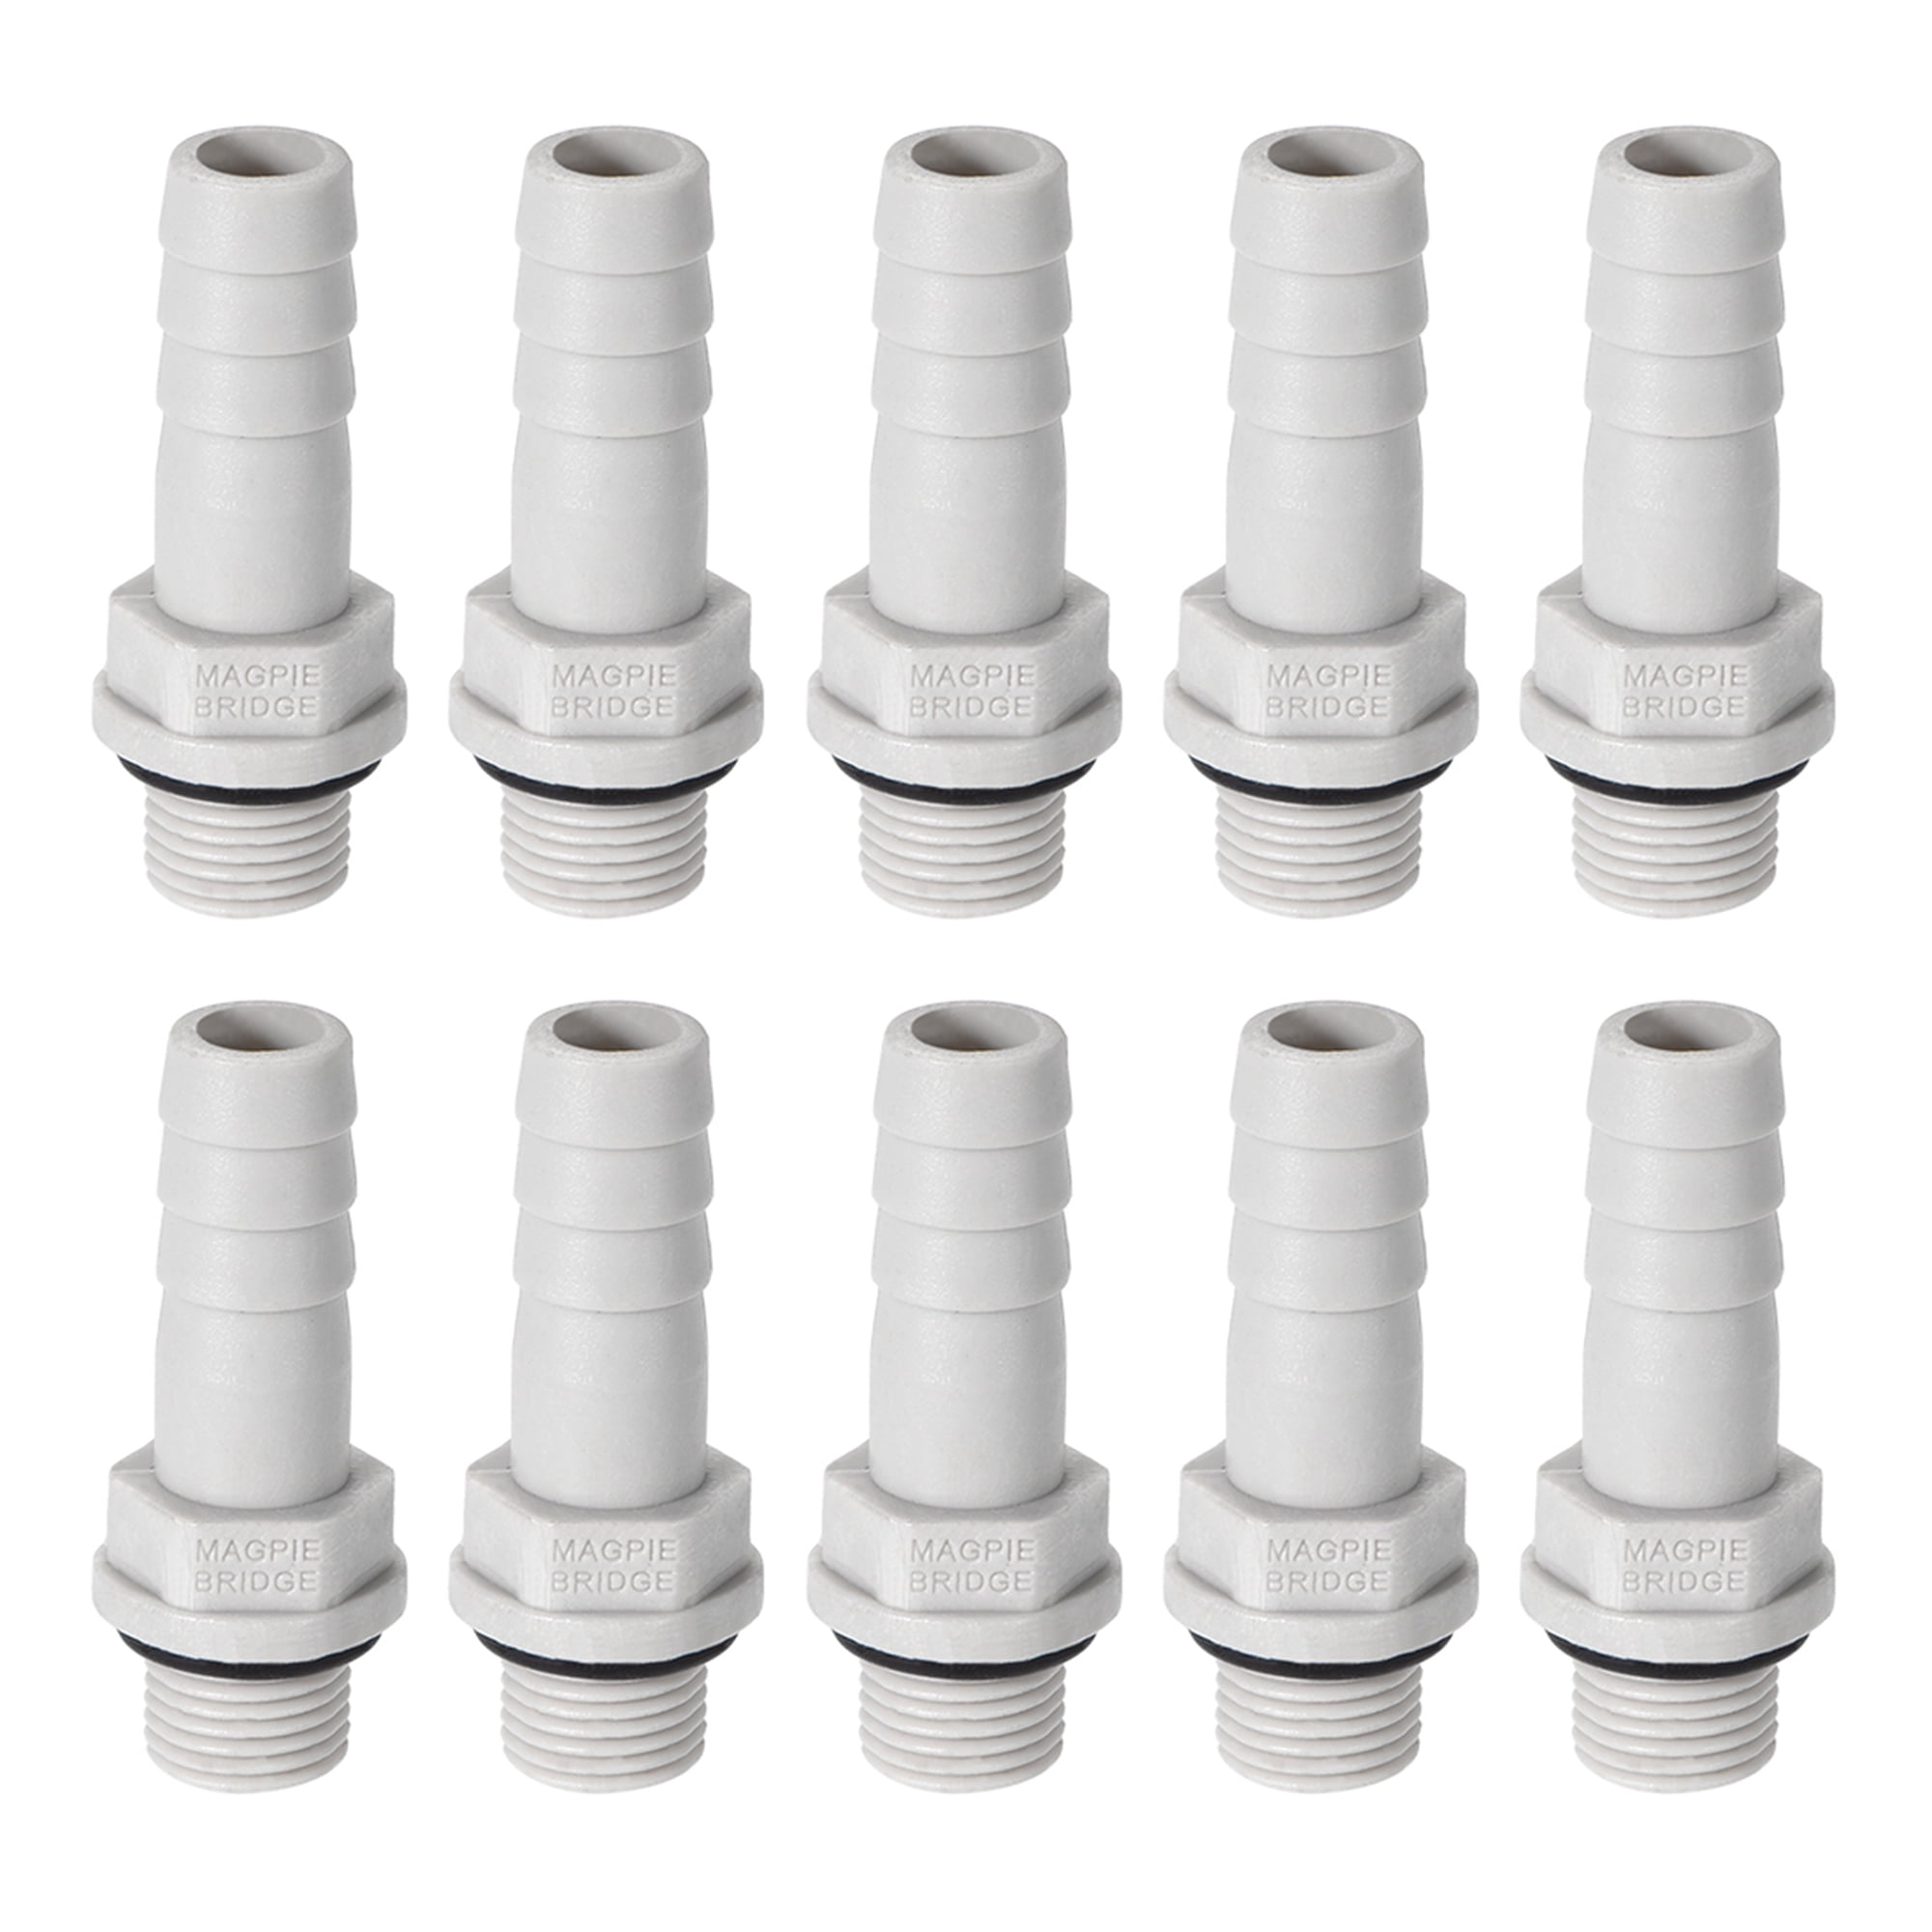 PVC Barb Hose Fittings Connector Adapter 8mm or 5/16" Barbed x 1/8" G